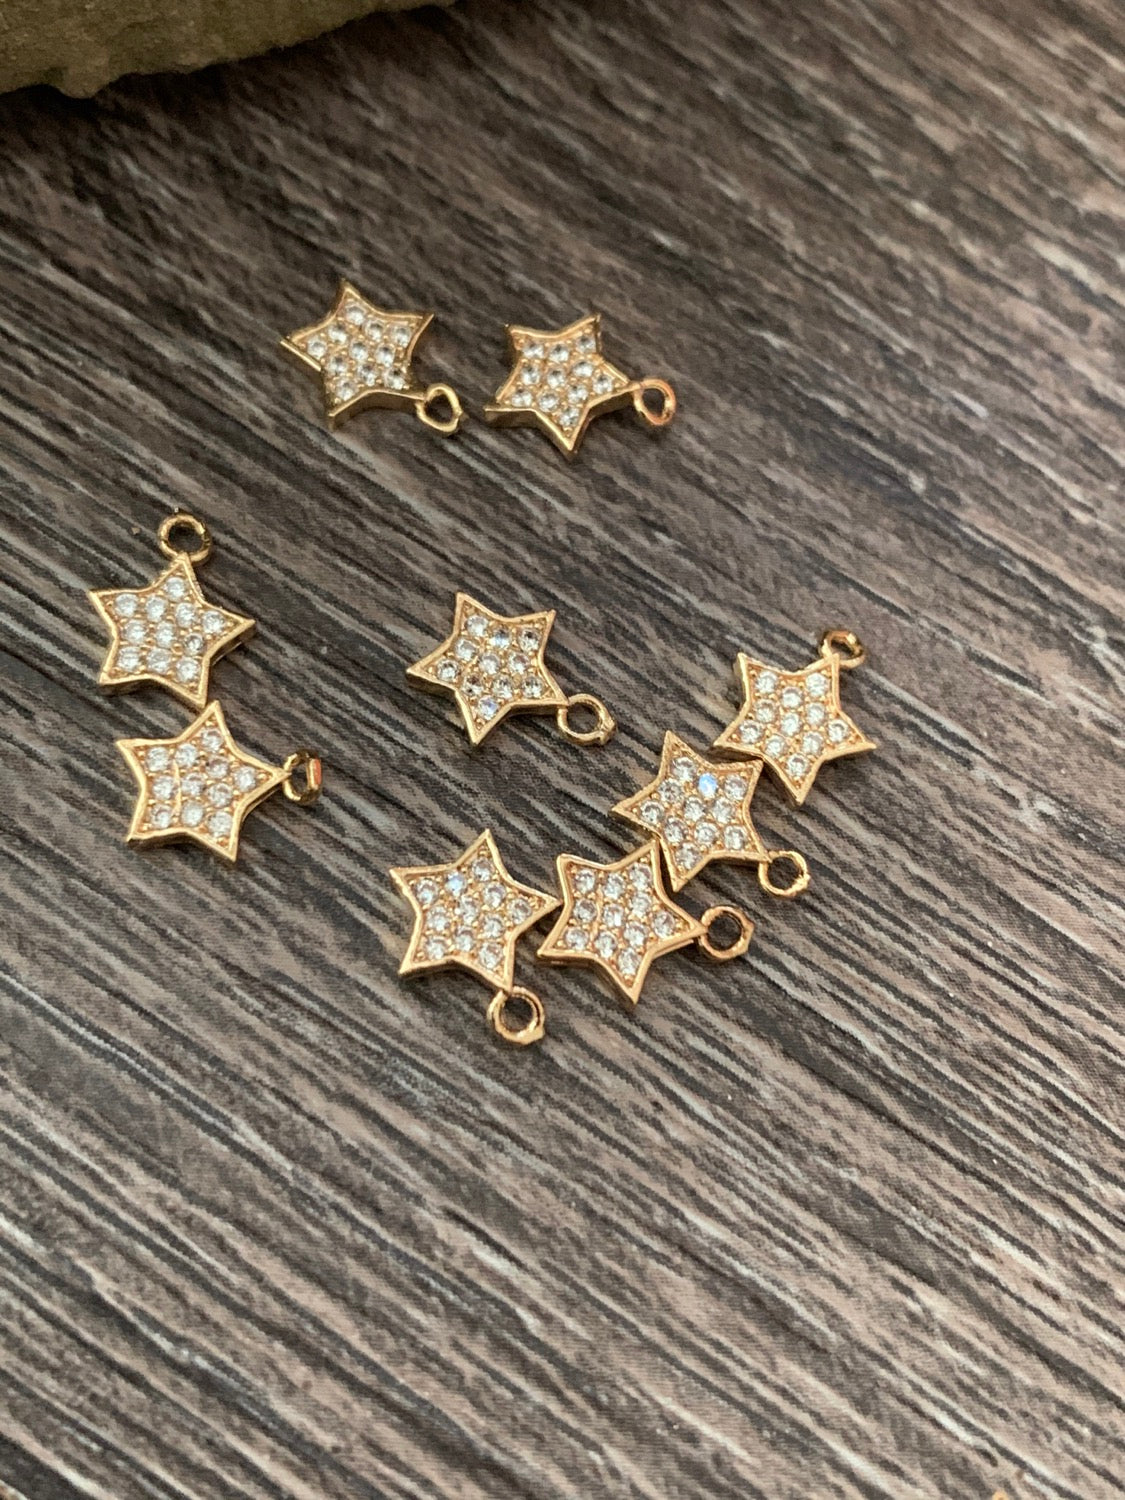 9mm gold filled star clear pave qty 1 / 20776